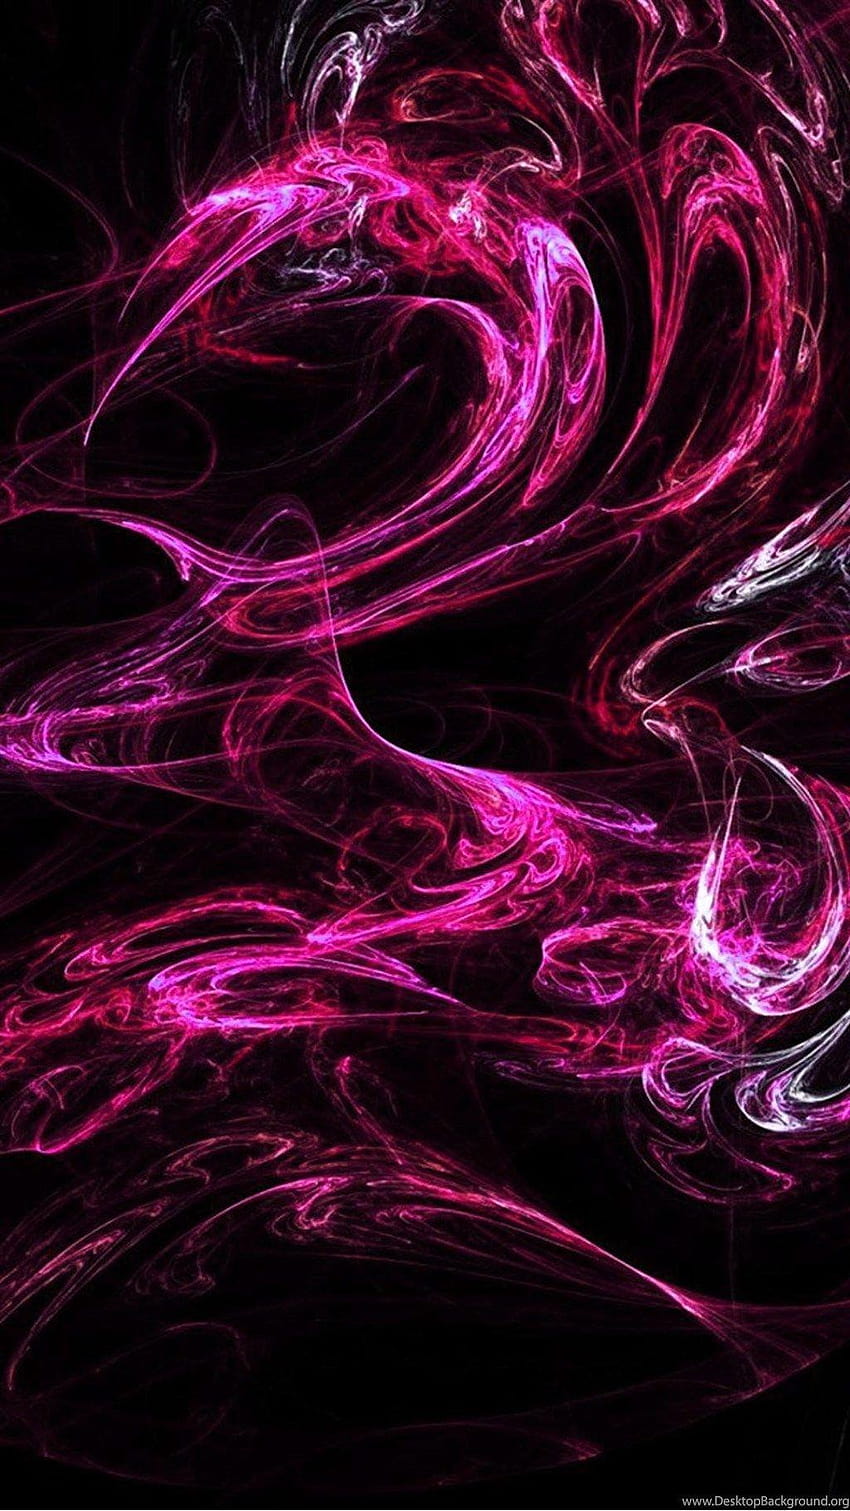 Samsung Galaxy S5 : Pink Smoke Android Mobile, black and pink for phone HD phone wallpaper